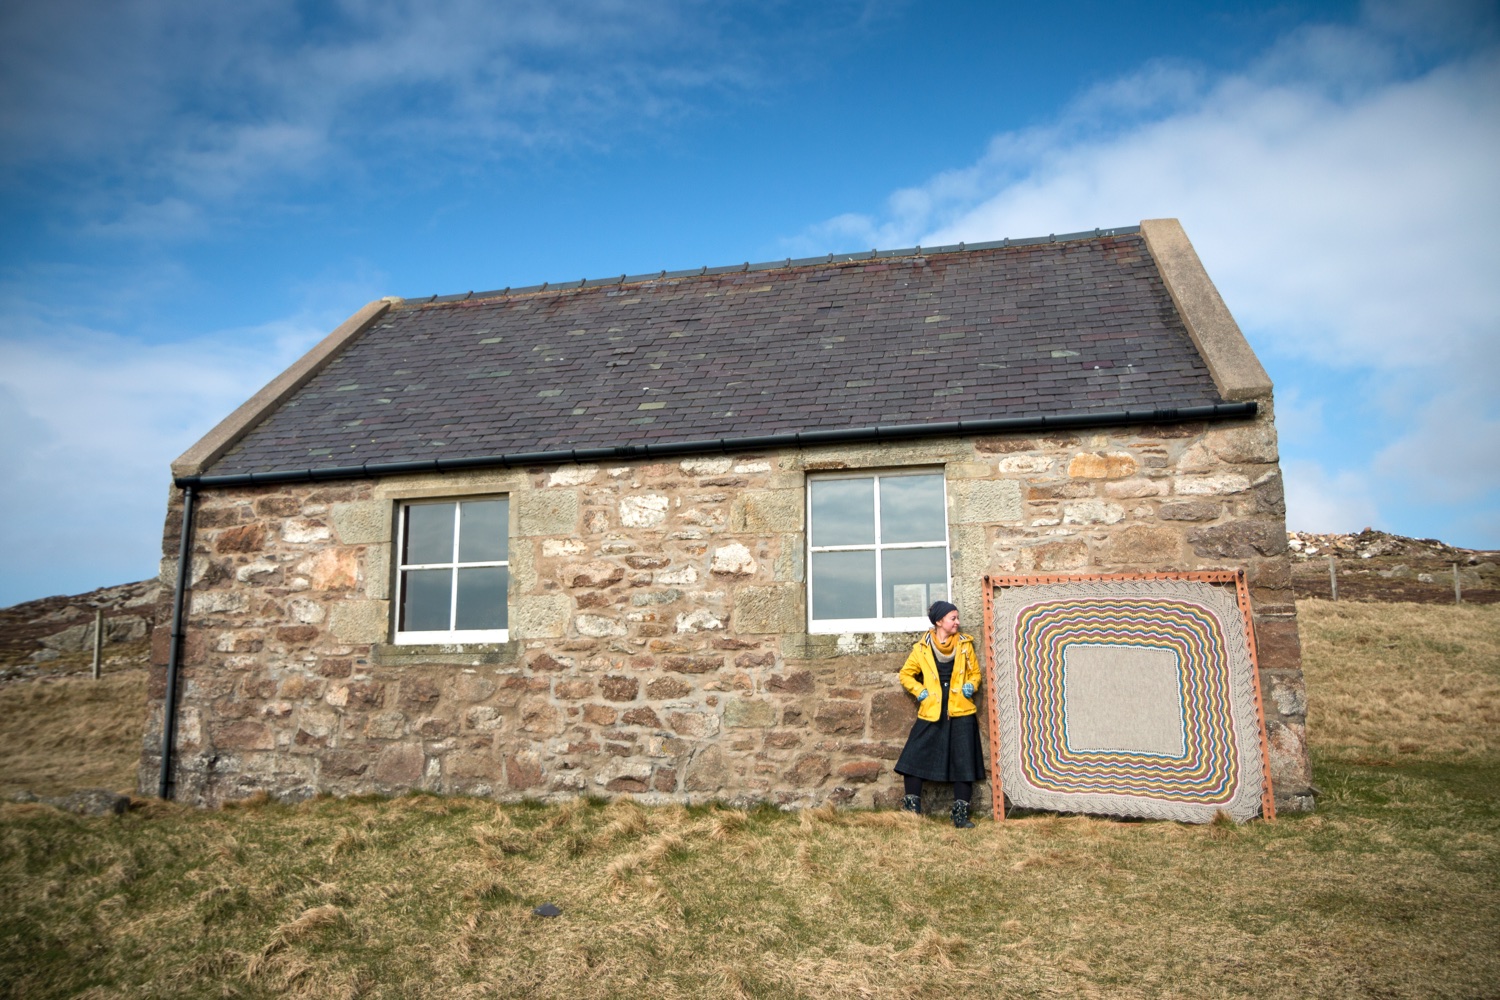 Knitwear designer Kate Davies standing in front of a small stone house with one of her designs